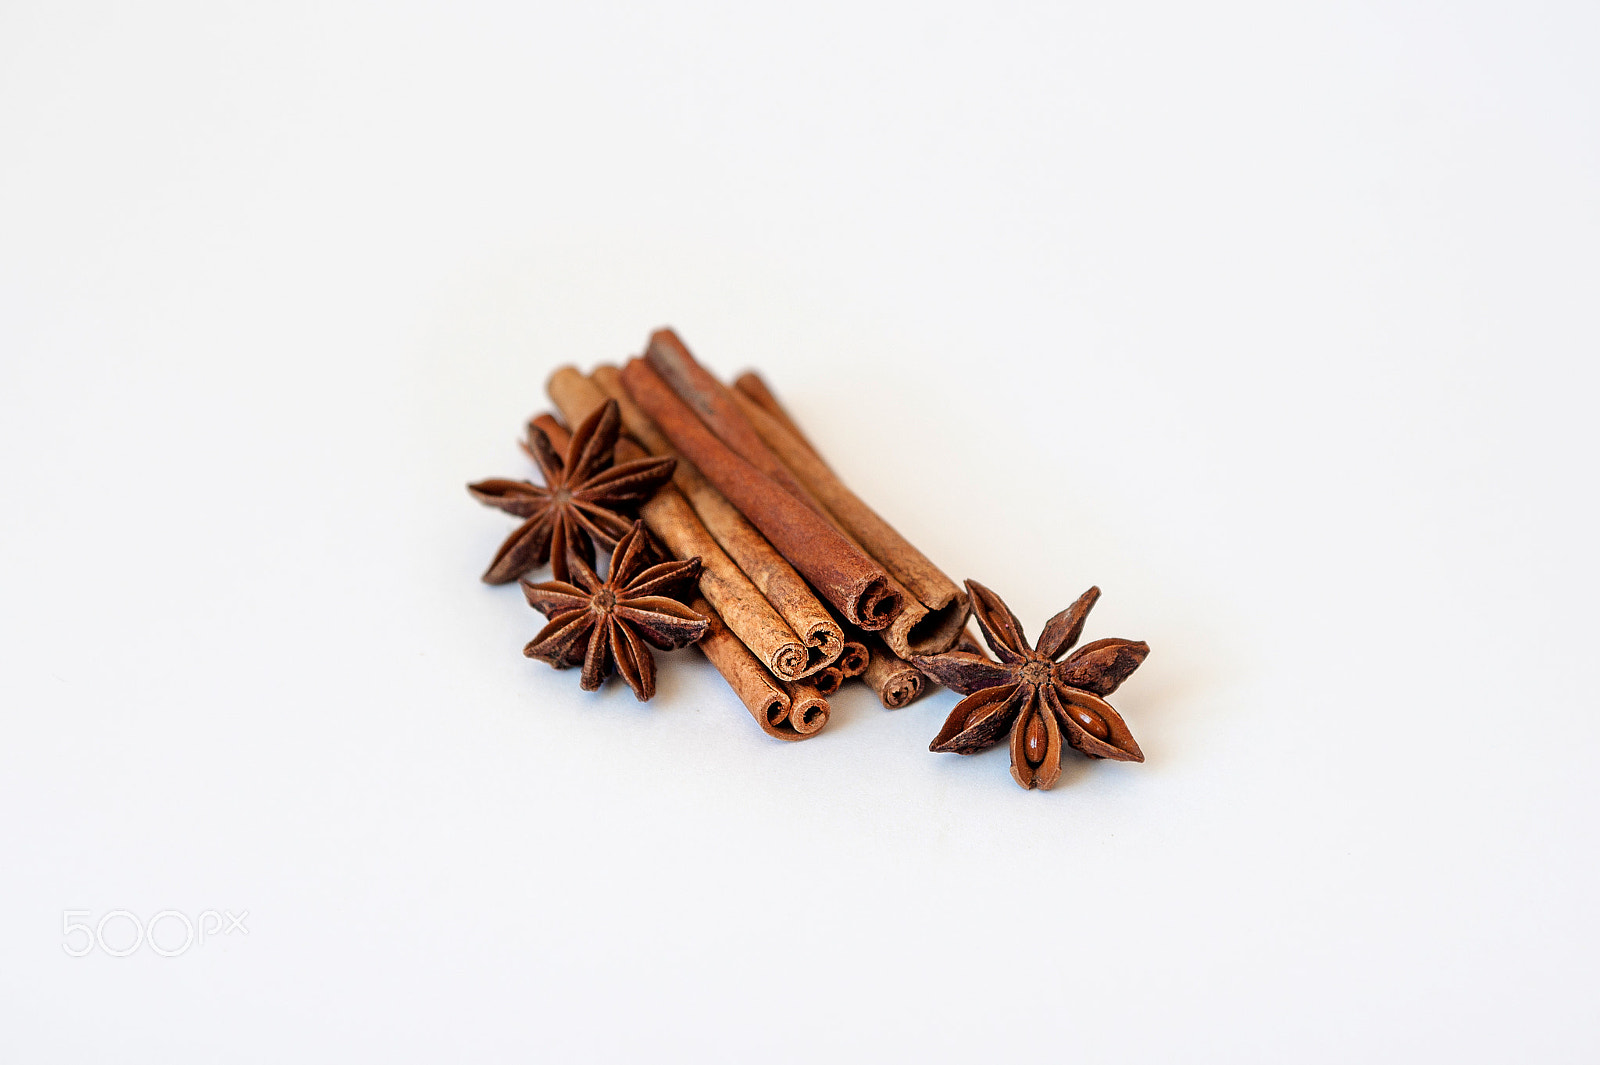 Nikon D700 sample photo. Cinnamon and star anise on white background photography